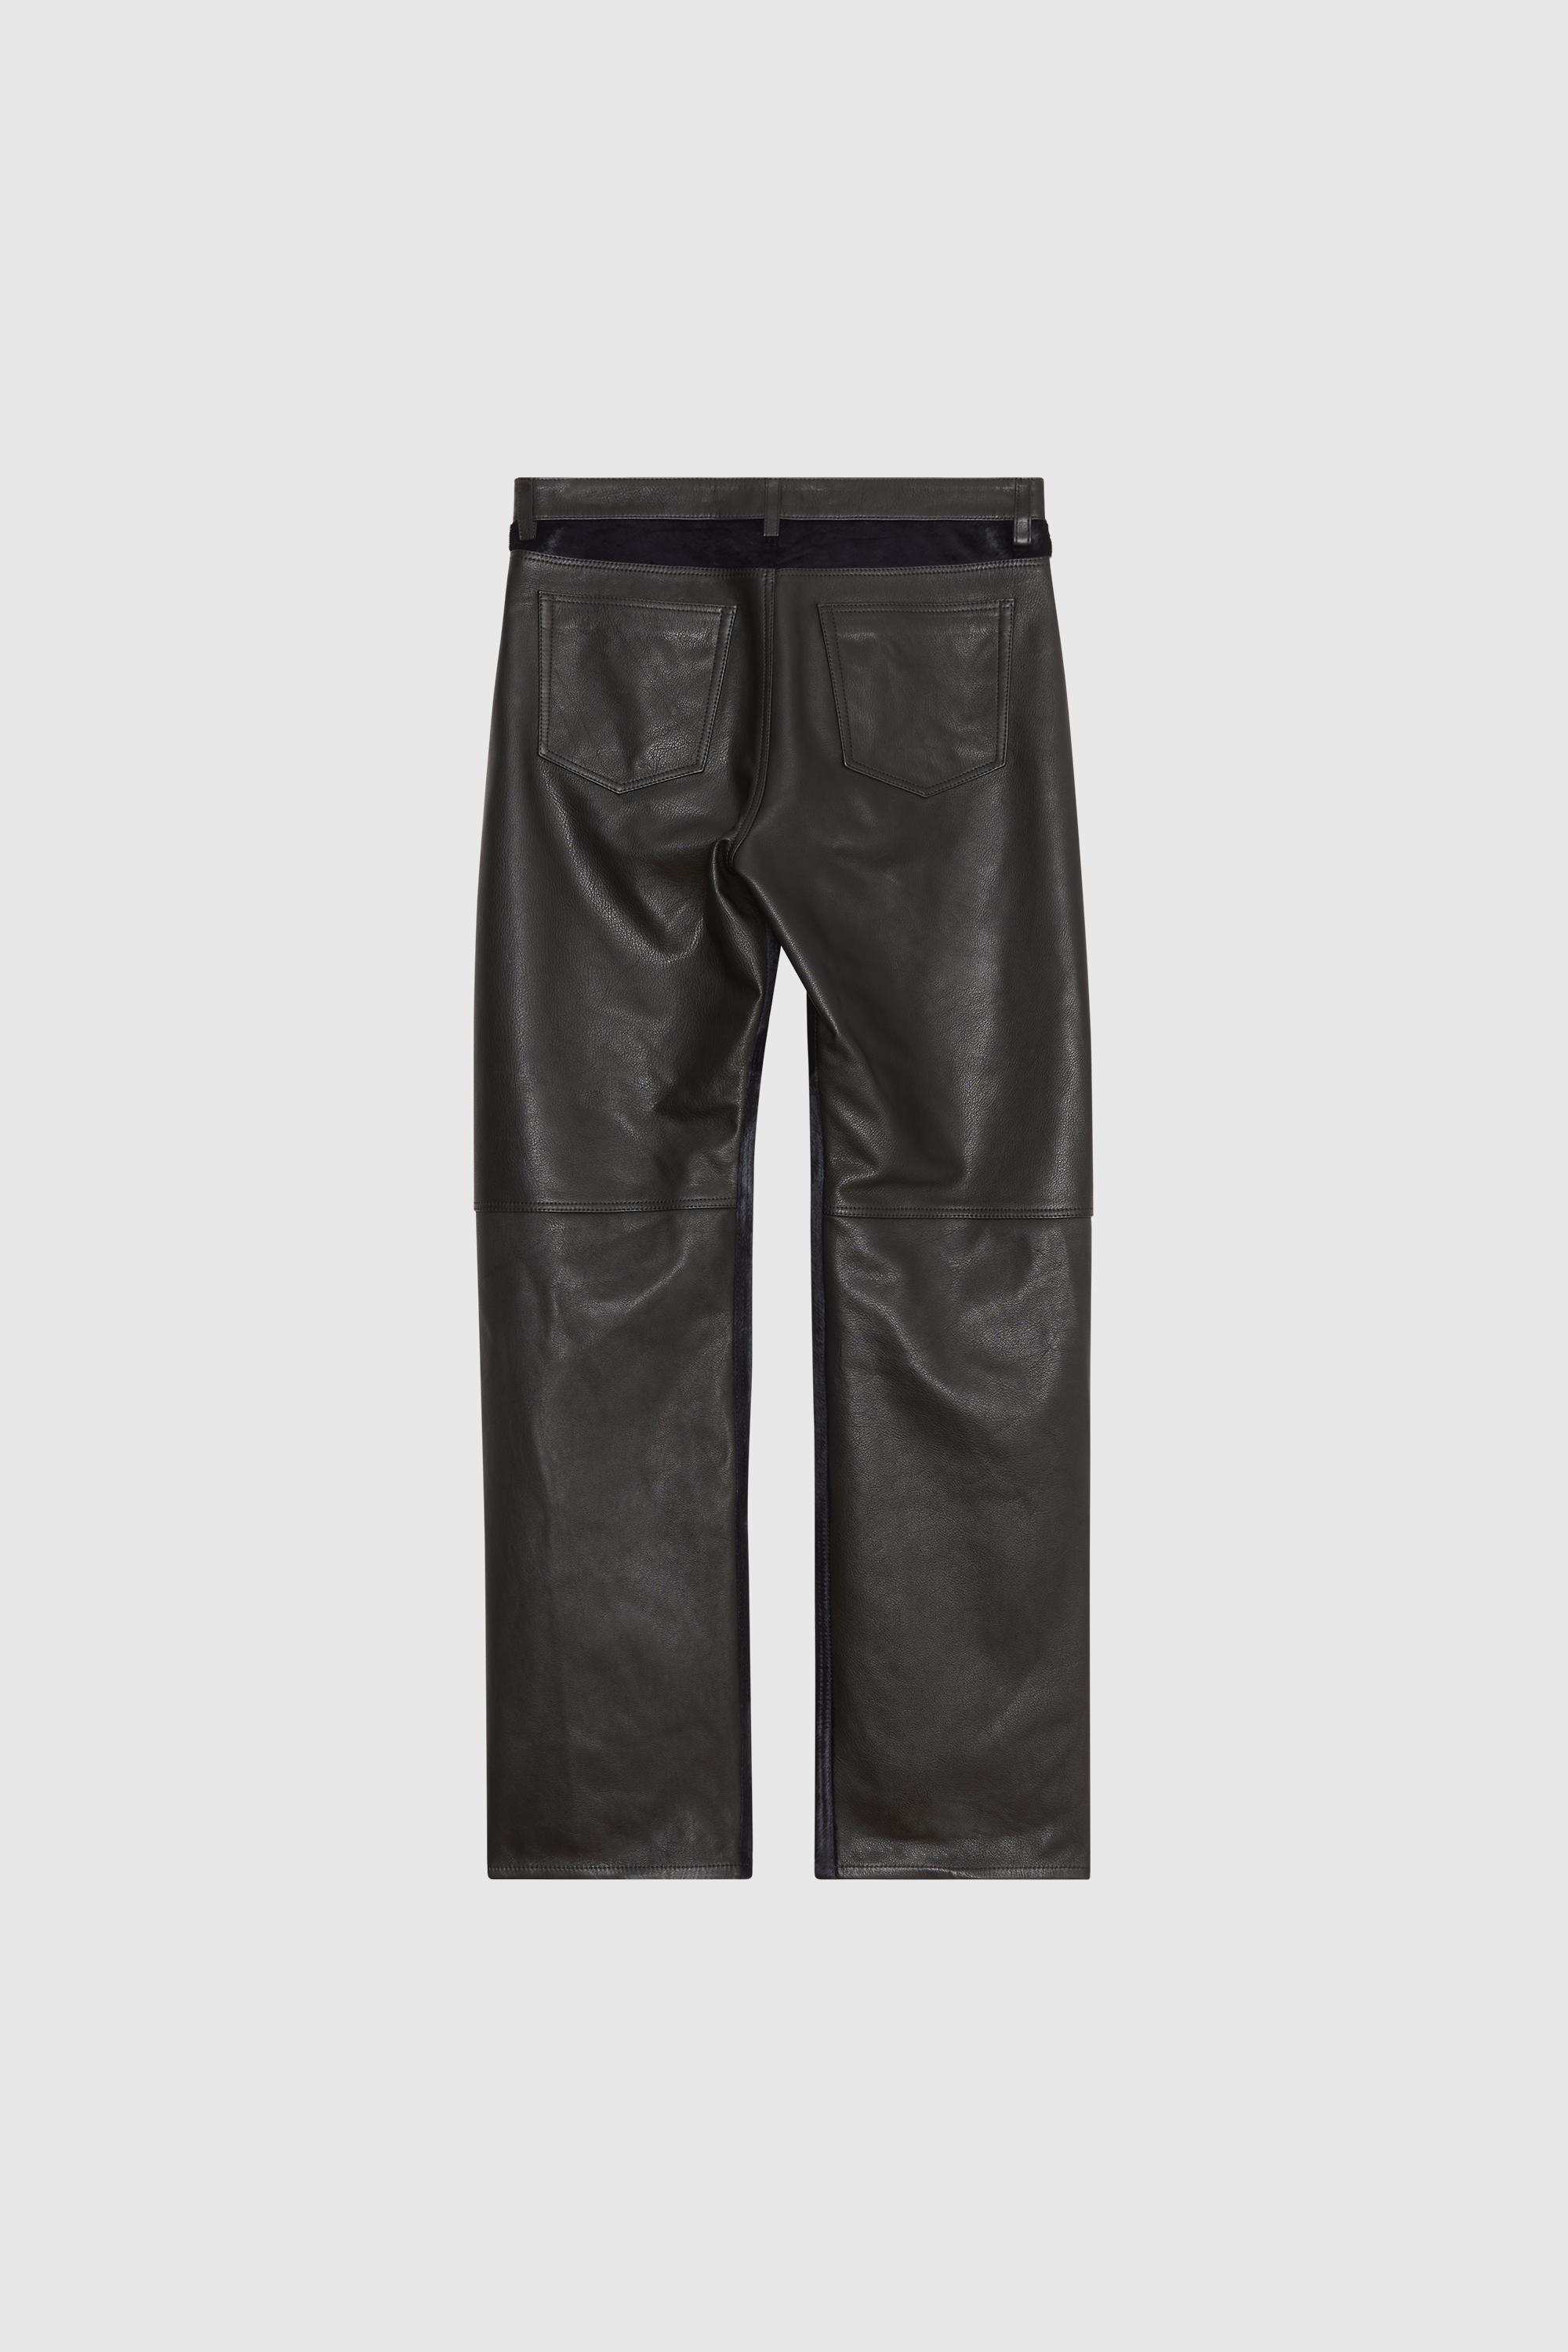 Wood Wood Henry calfhair leather trousers Navy | WoodWood.com